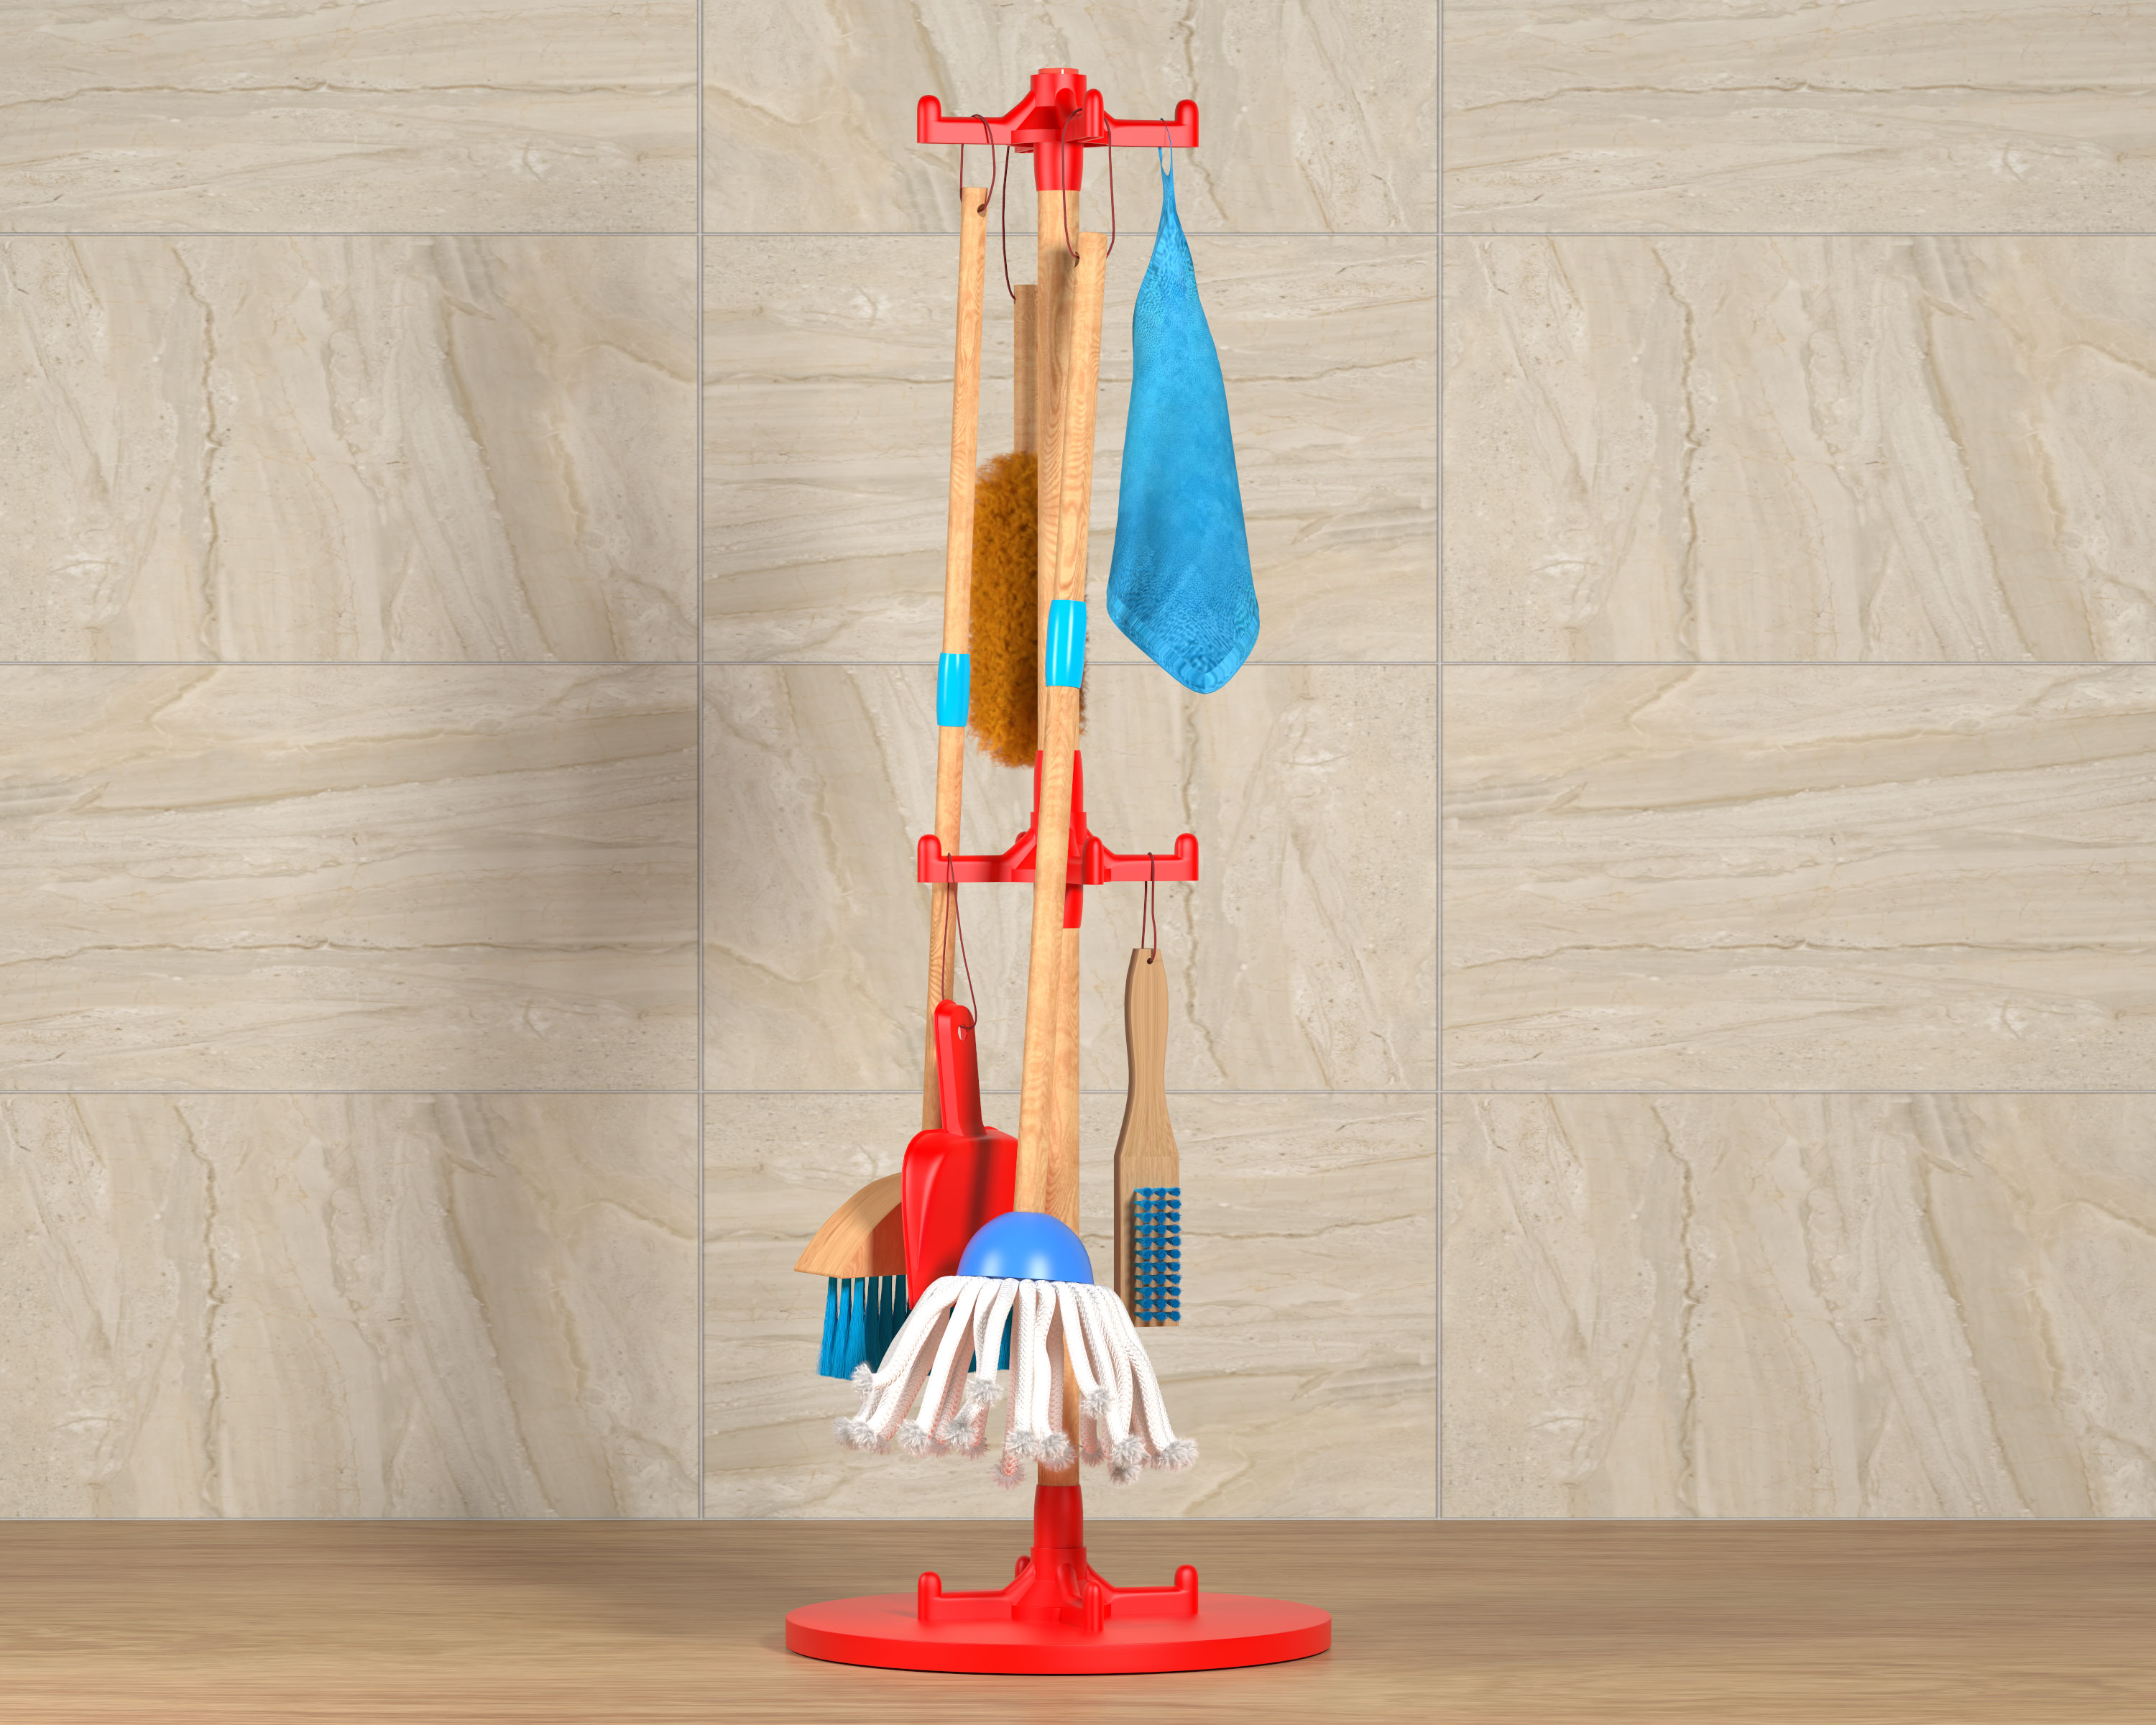 JustForKids Wooden Detachable Kids Cleaning Toy Set - Duster, Brush, Mop, Broom and Hanging Stand Play - Housekeeping Kit - Stem Toys for Toddlers